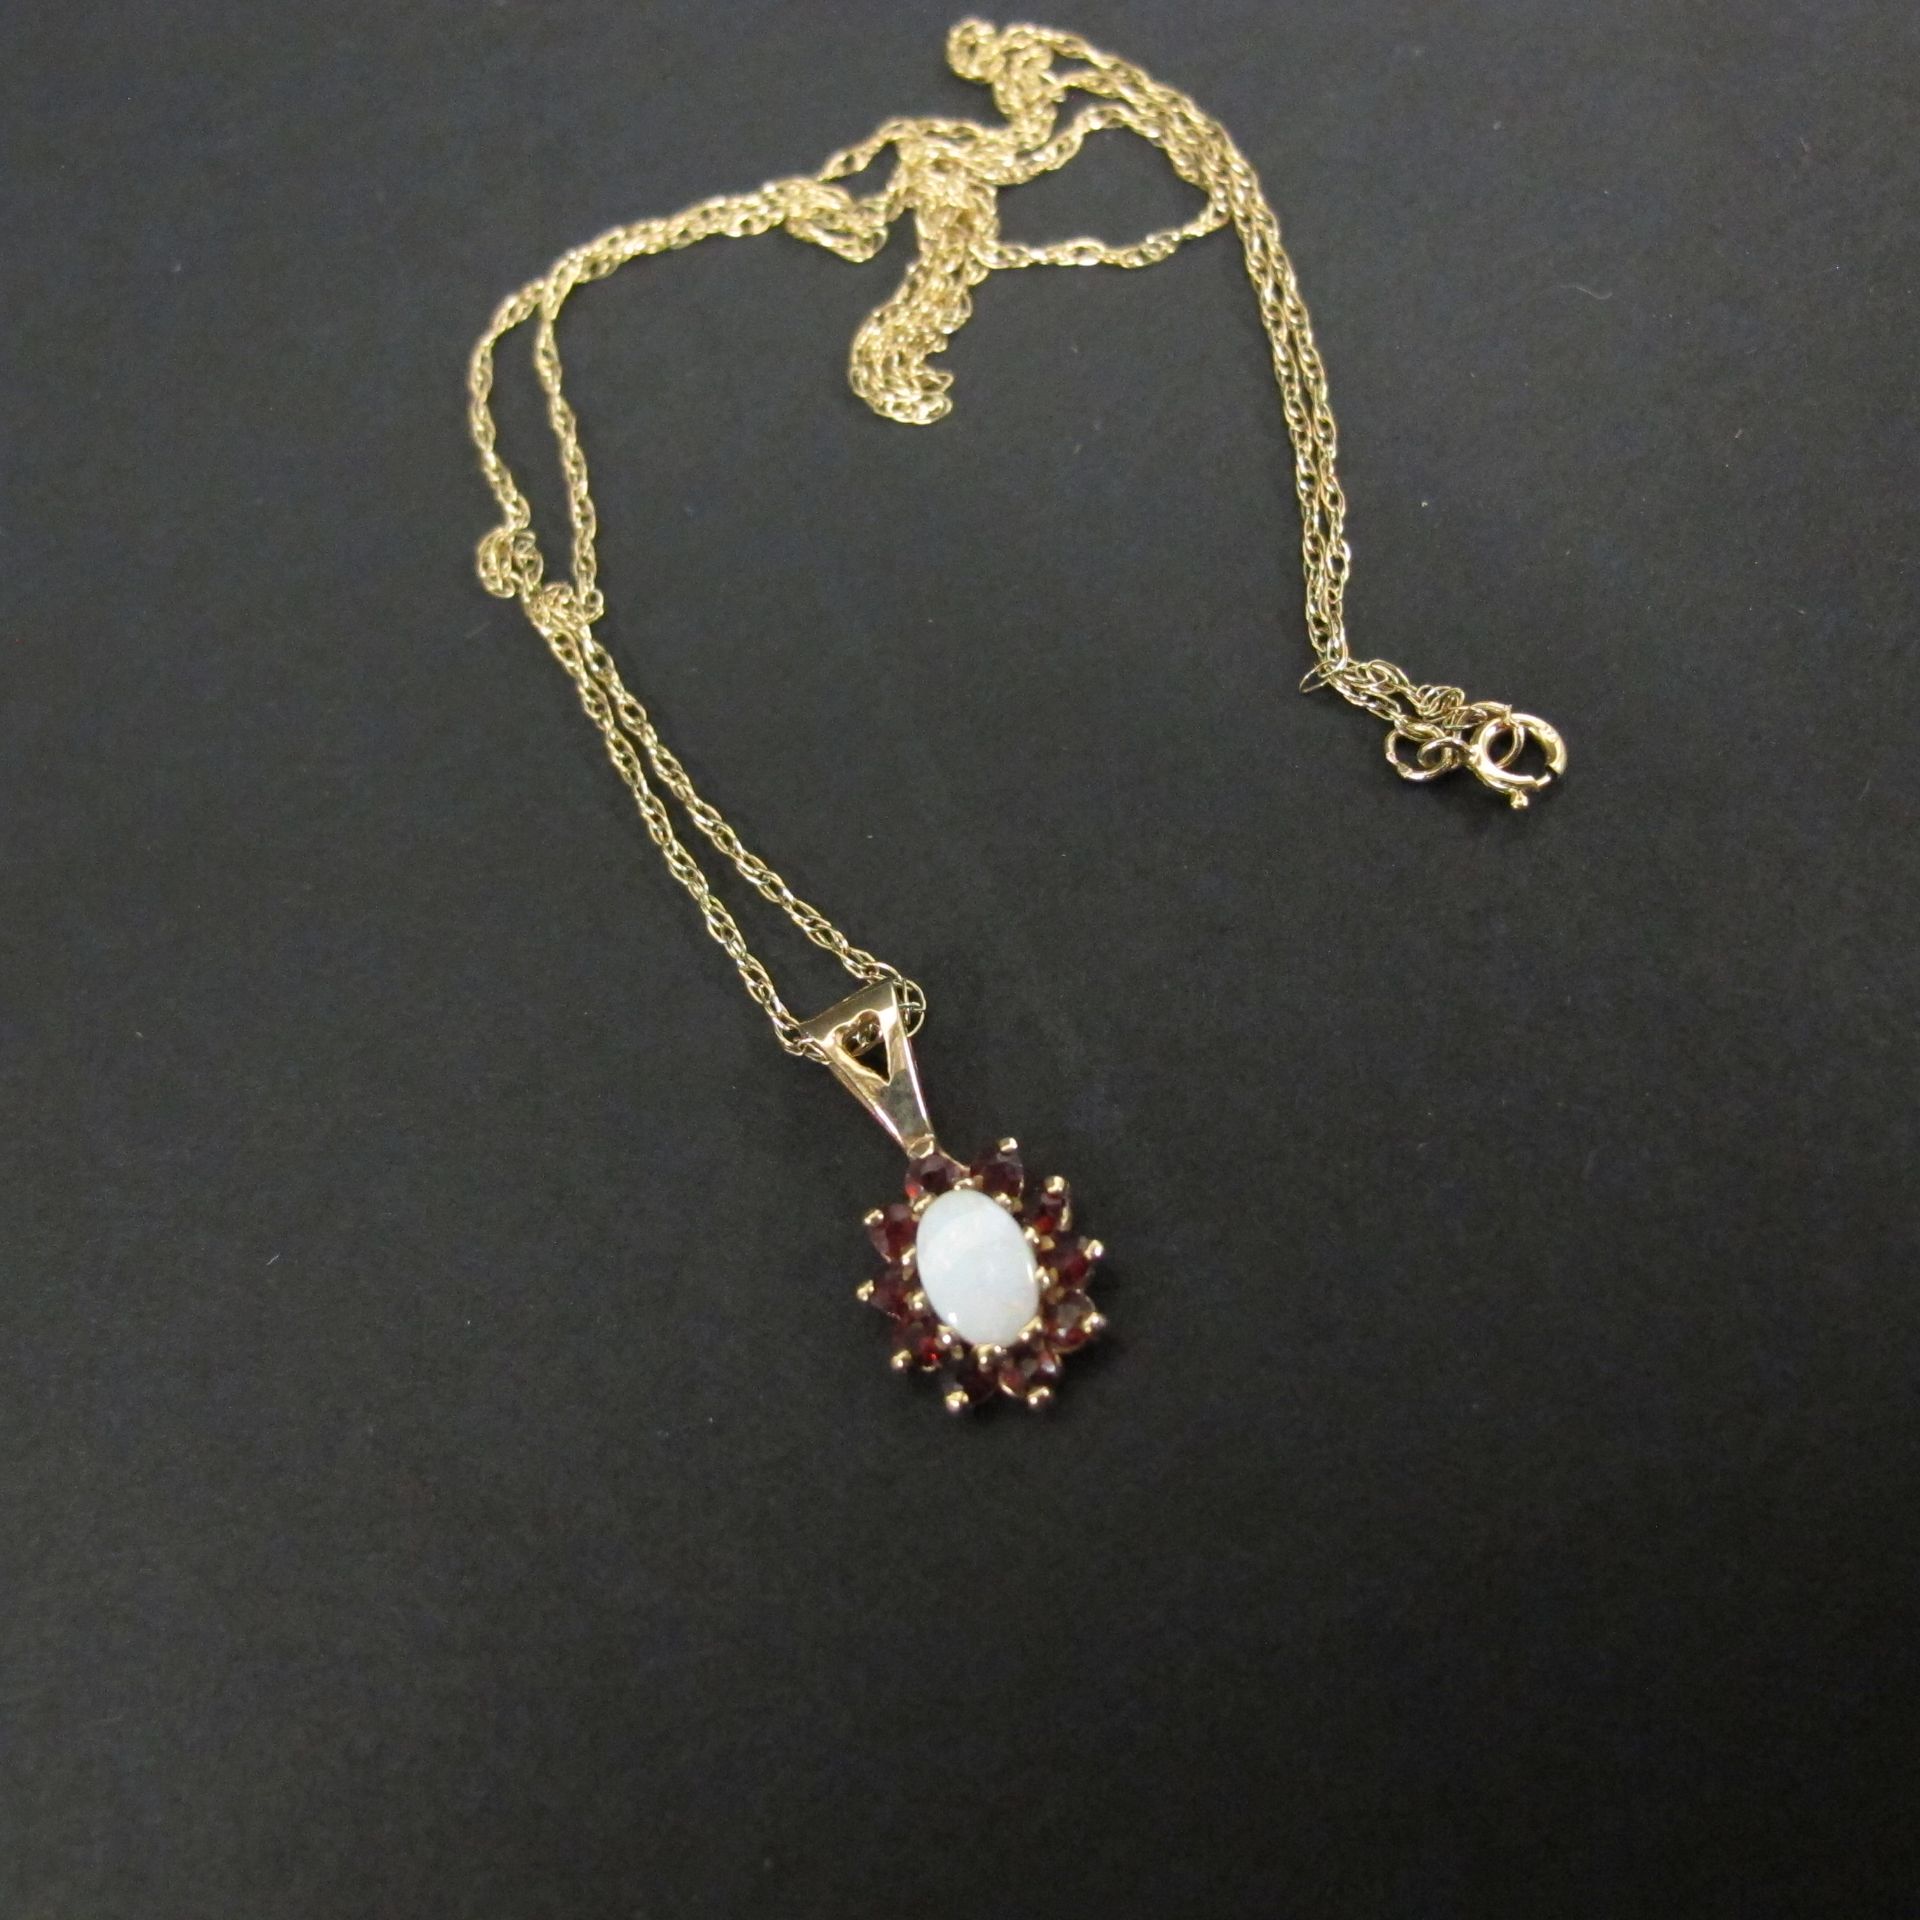 9ct gold, opal and garnet pendant on 9ct gold chain (est £30-£60) - Image 2 of 3